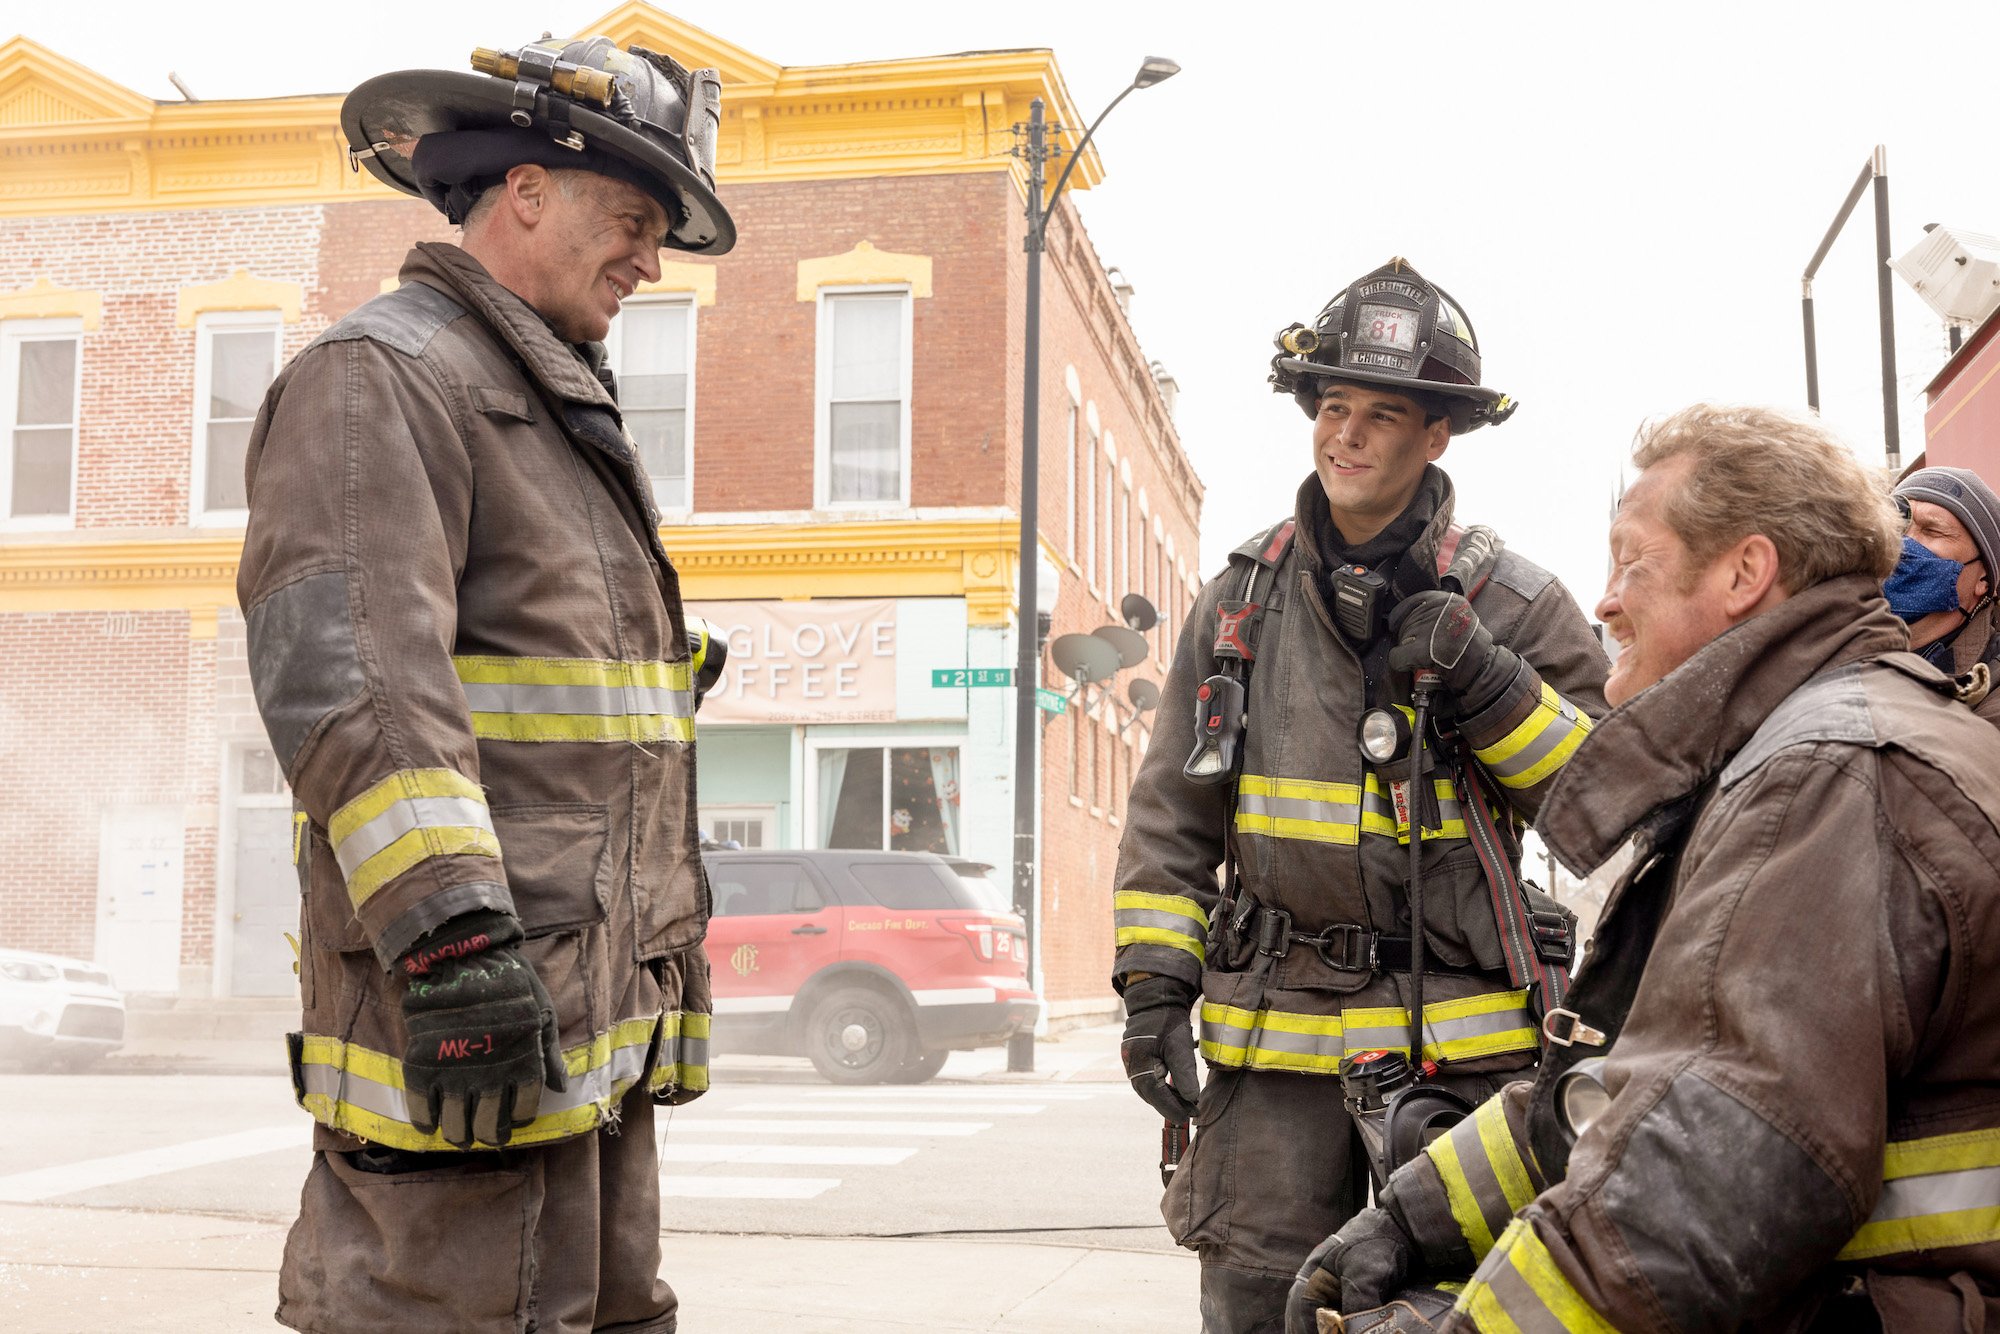 'Chicago Fire' The Season Finale Is Going to Be 'Rough', Showrunner Says